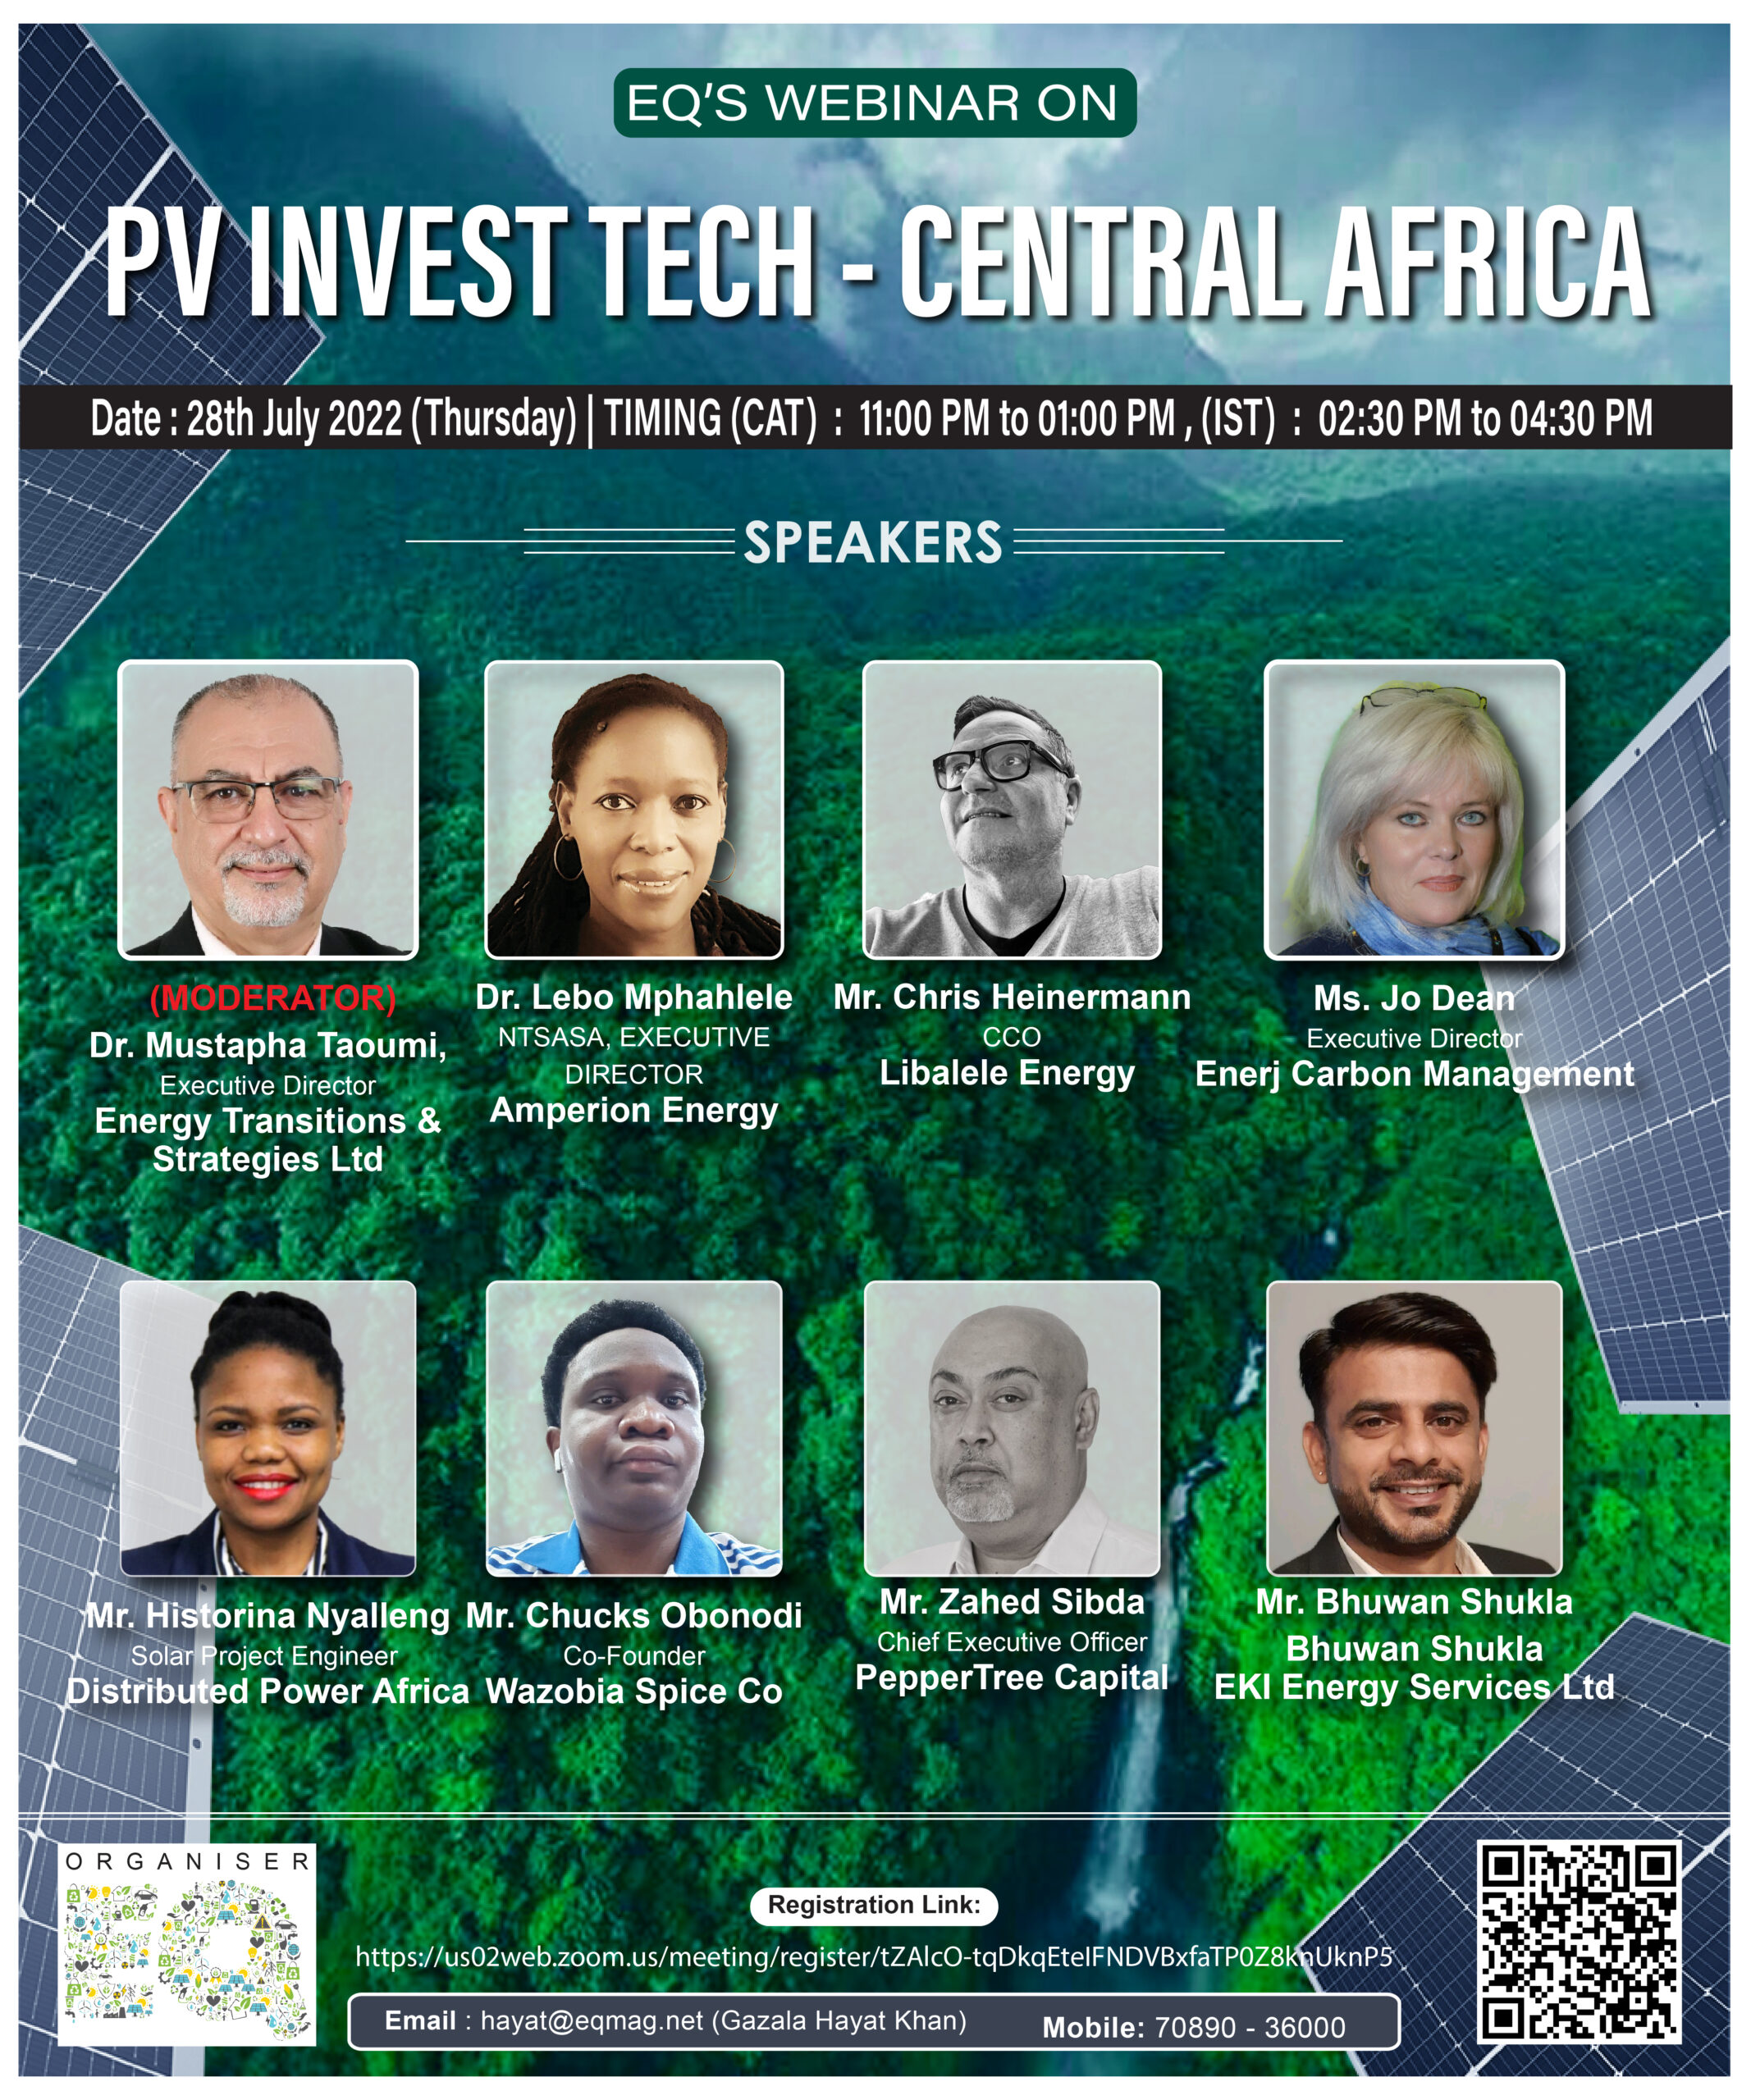 EQ Webinar on Central Africa PV InvesTech 28th July 2022 (Thursday) 2:30 PM Onwards….Register Now!